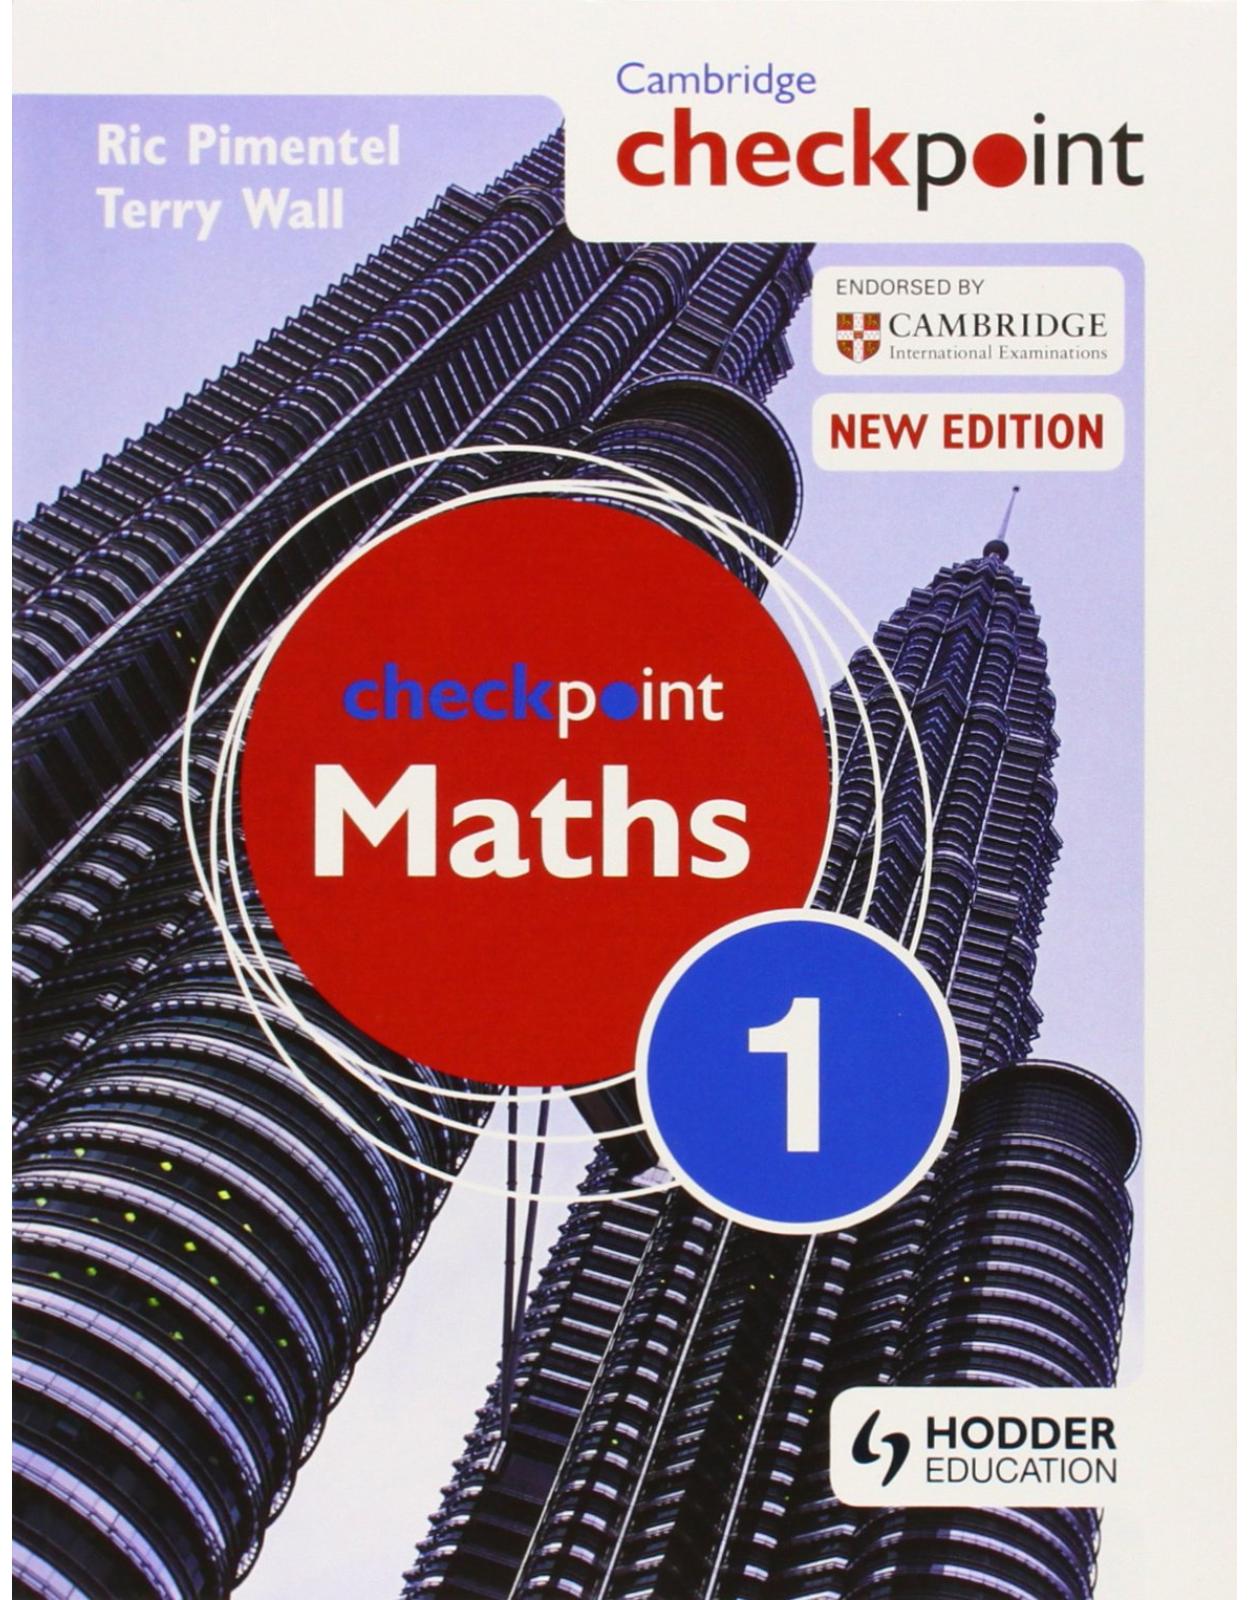 Cambridge Checkpoint Maths Student’s Book 1